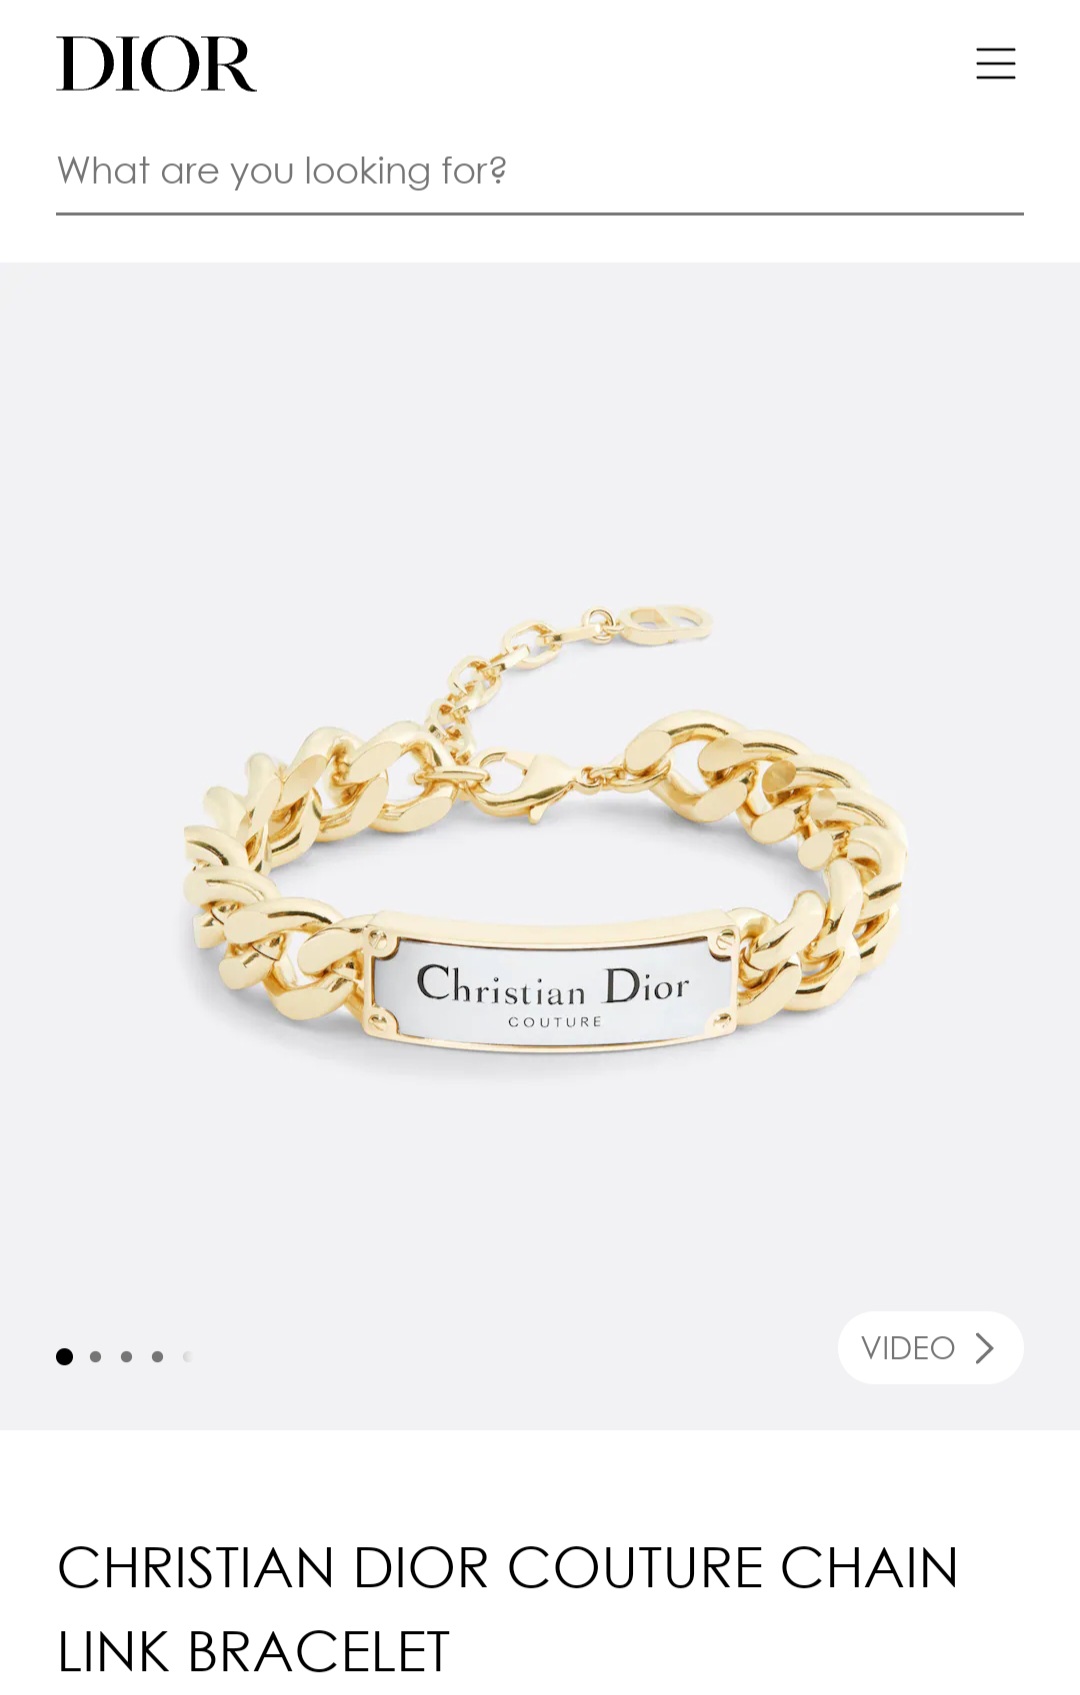 CHRISTIAN DIOR COUTURE CHAIN LINK bracelet